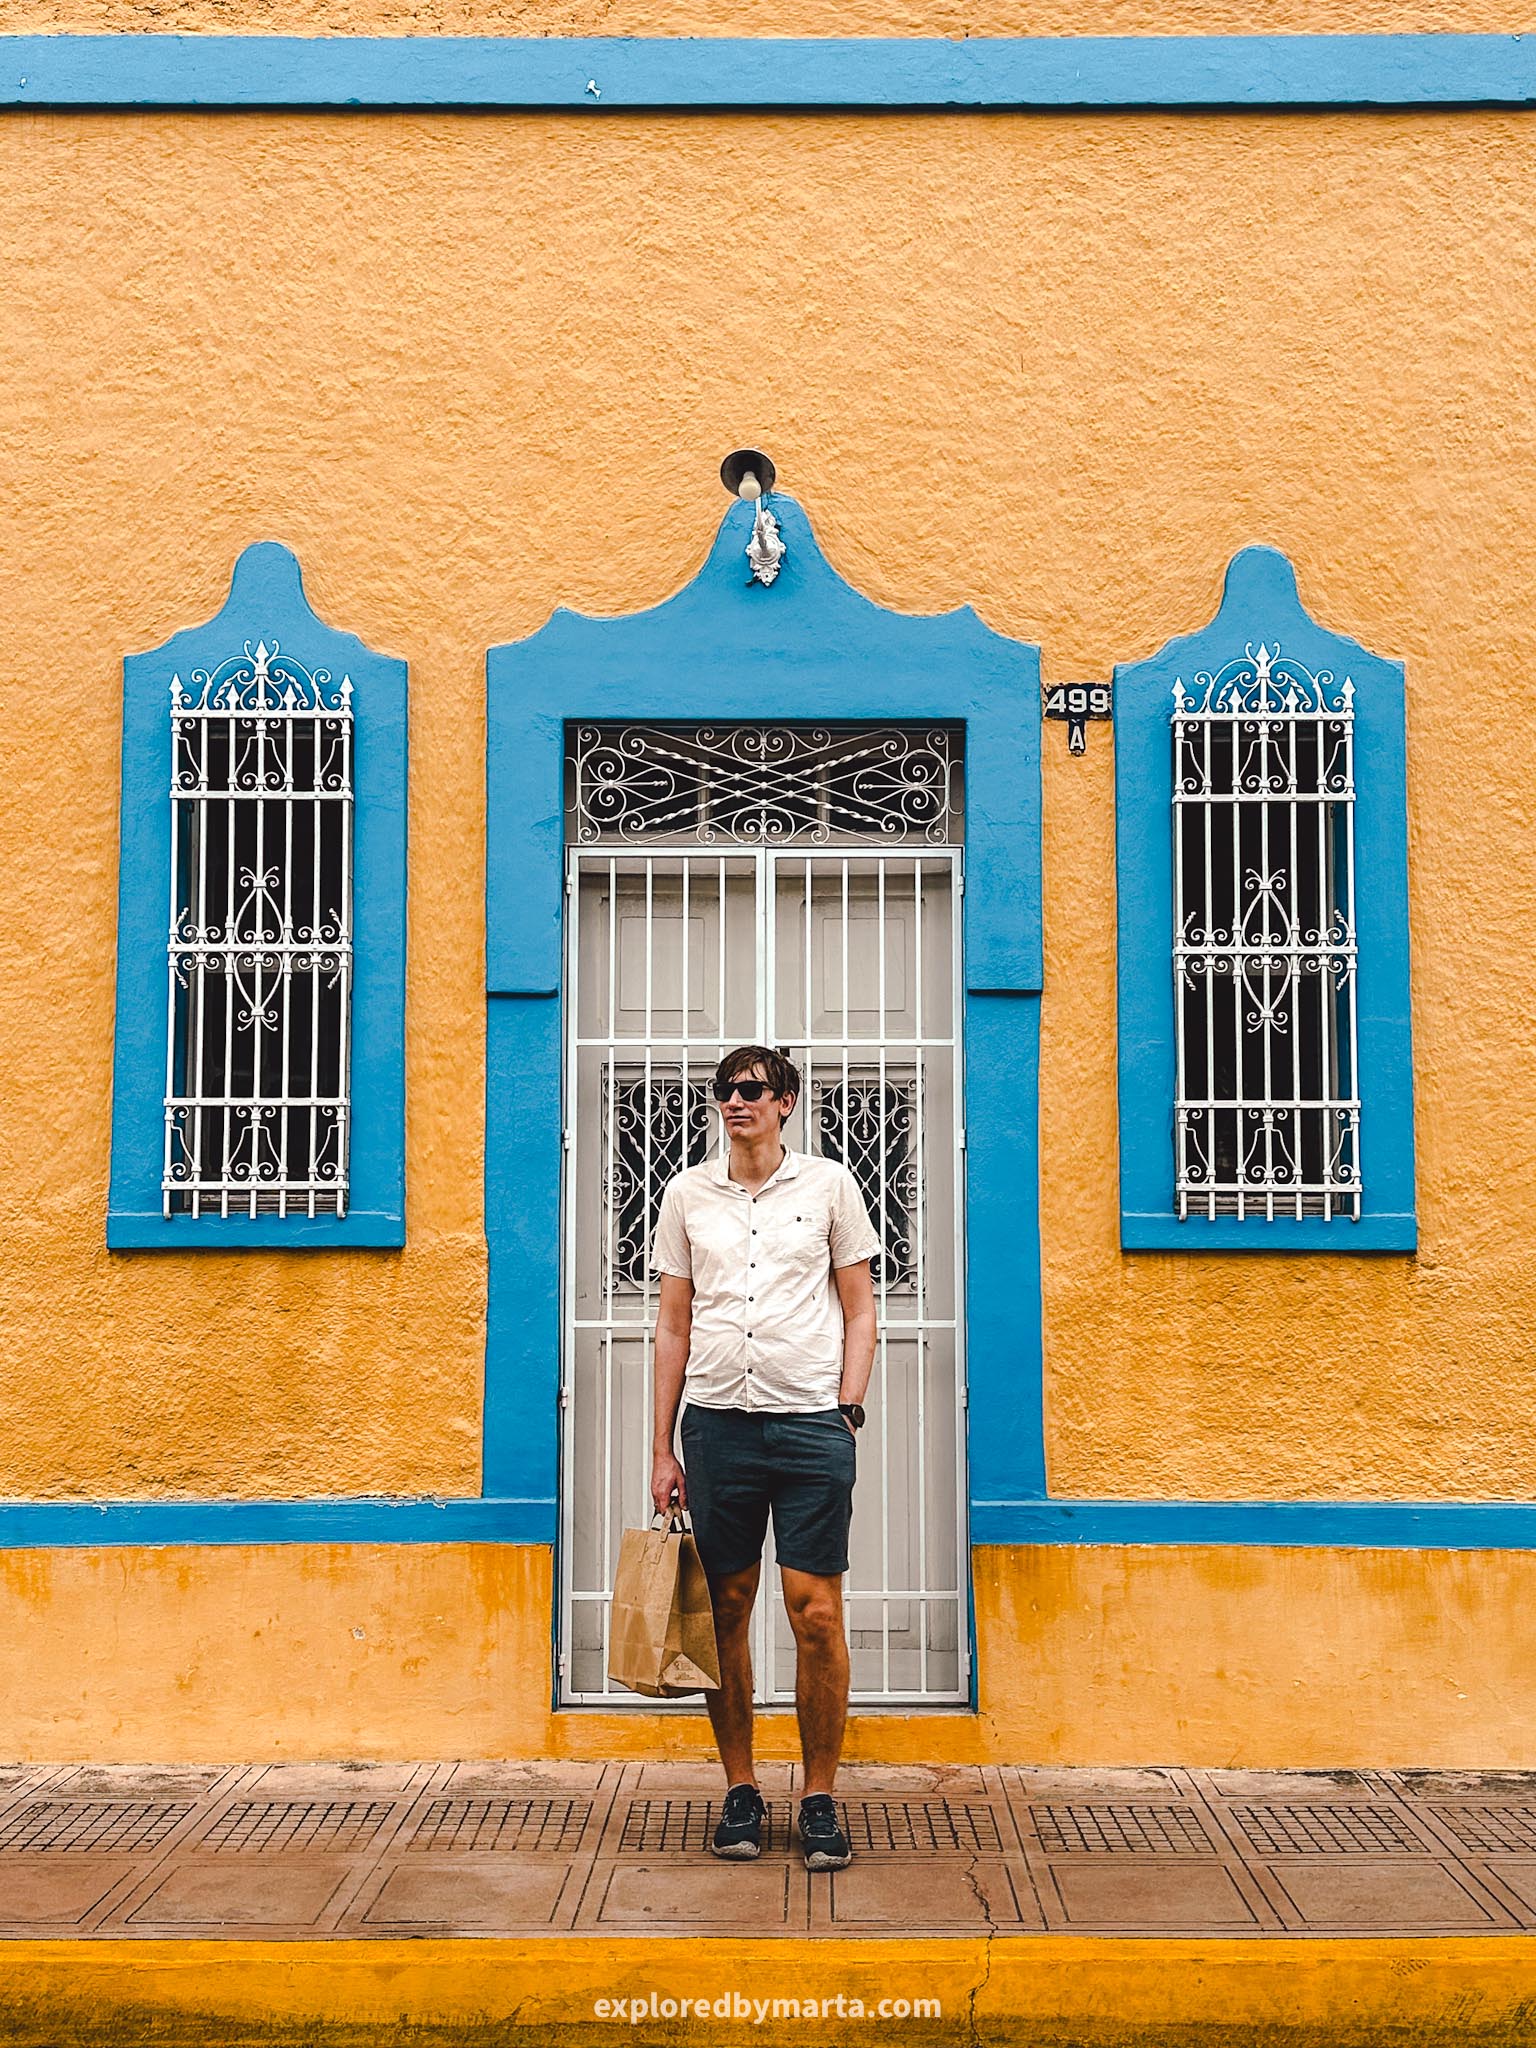 Merida, Mexico-photo perfect colorful houses and a yellow church with two spires in Parque de Santa Ana in Merida, Mexico